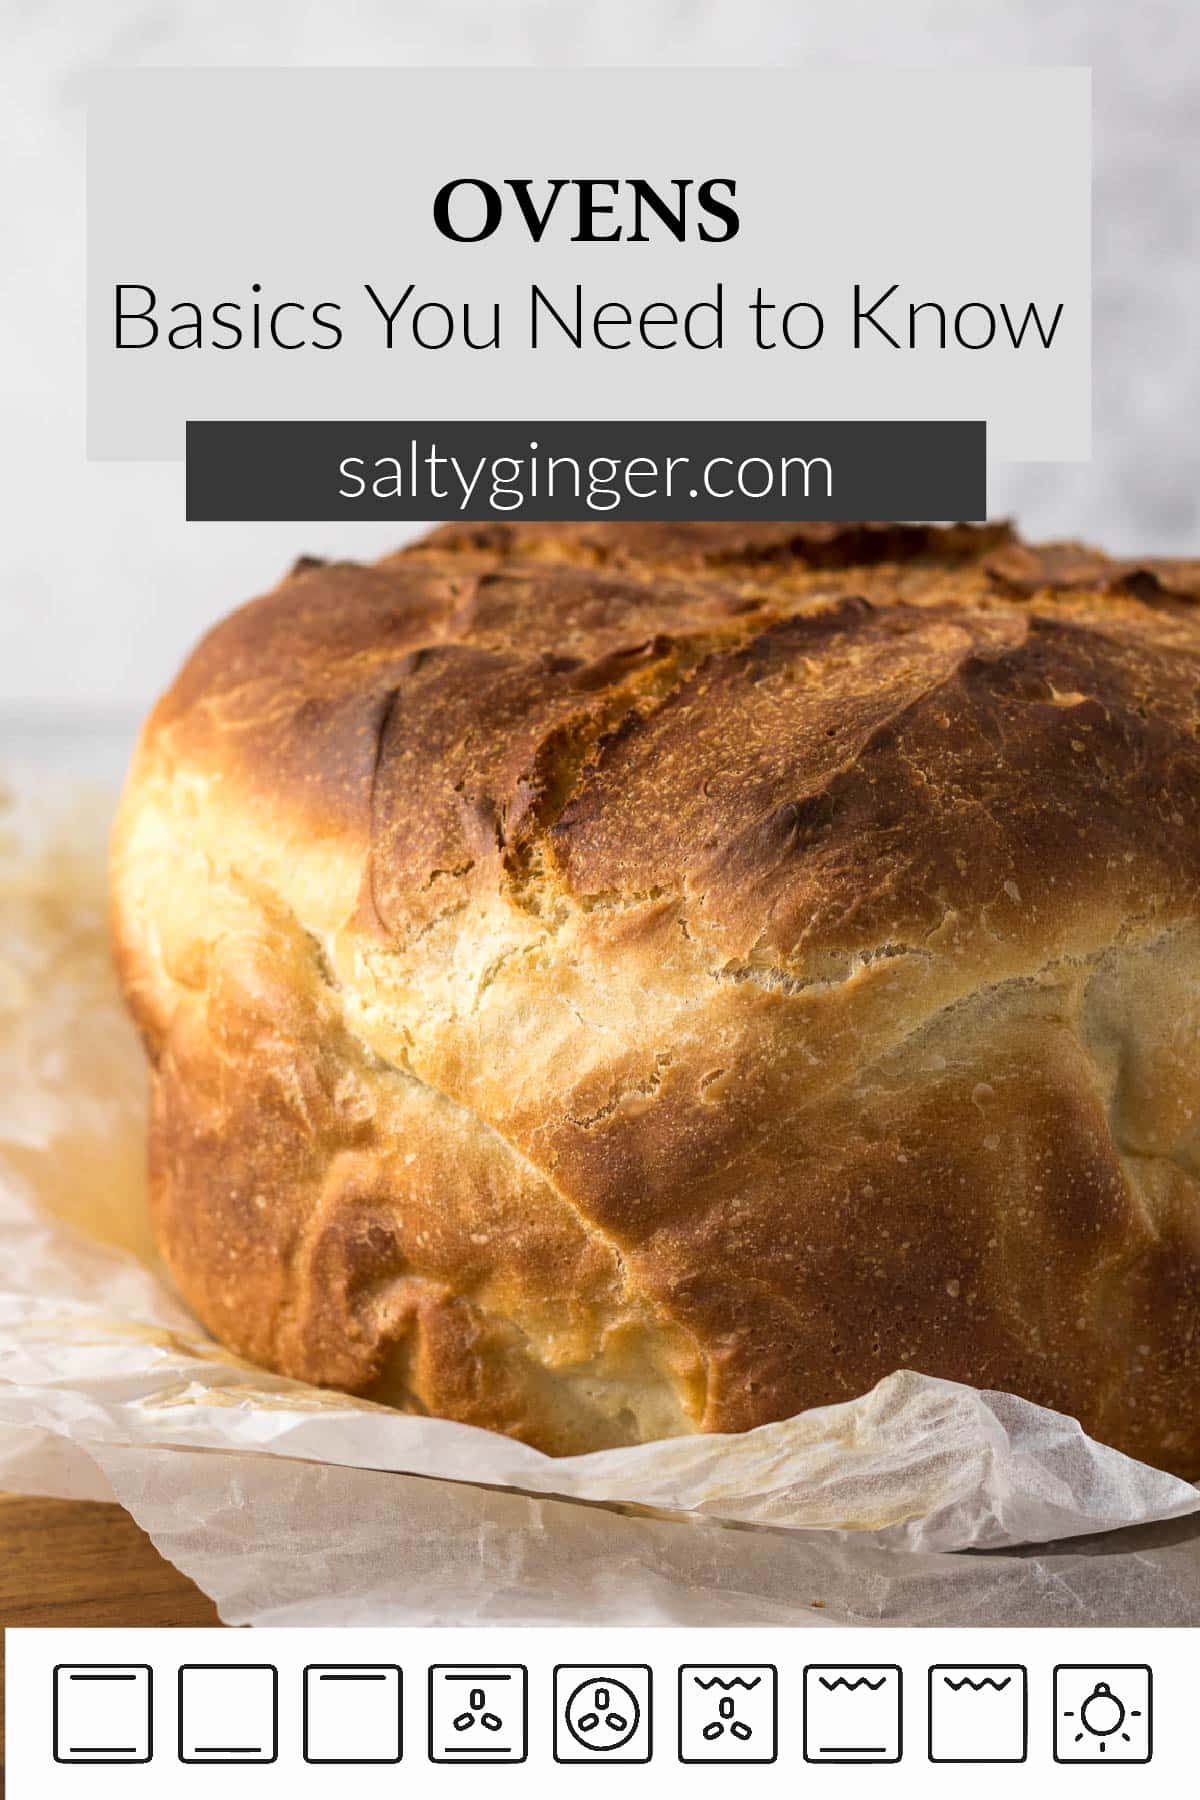 Text overlay: Ovens, Basics You Need to Know. Photo - Loaf of bread. 